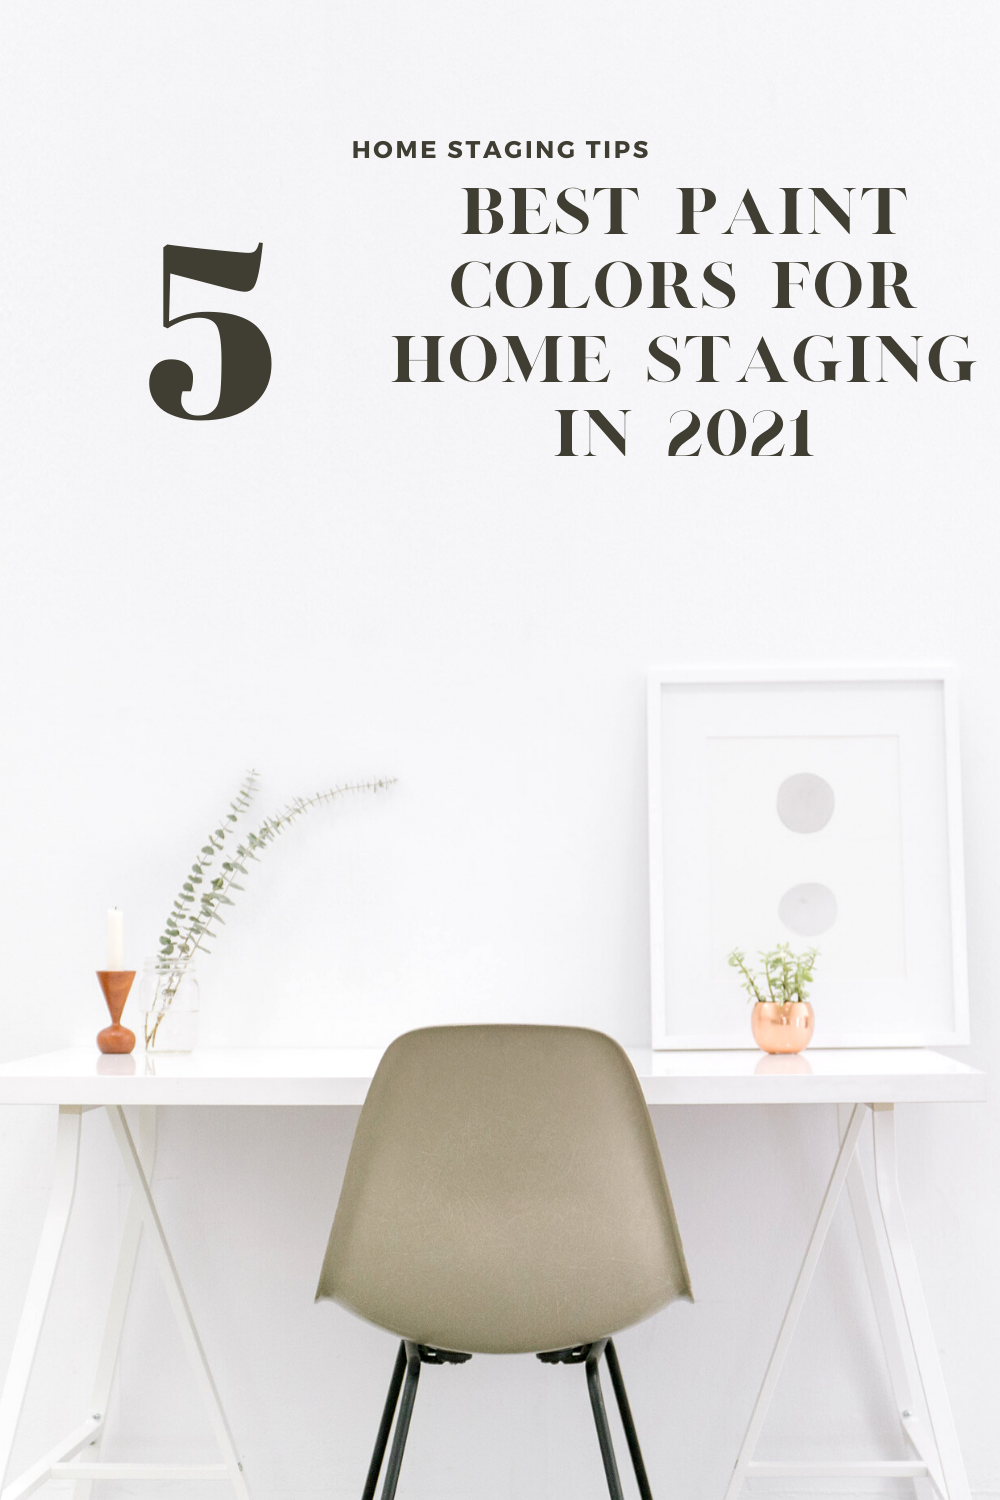 Best Paint Colors For Home Staging in 2021